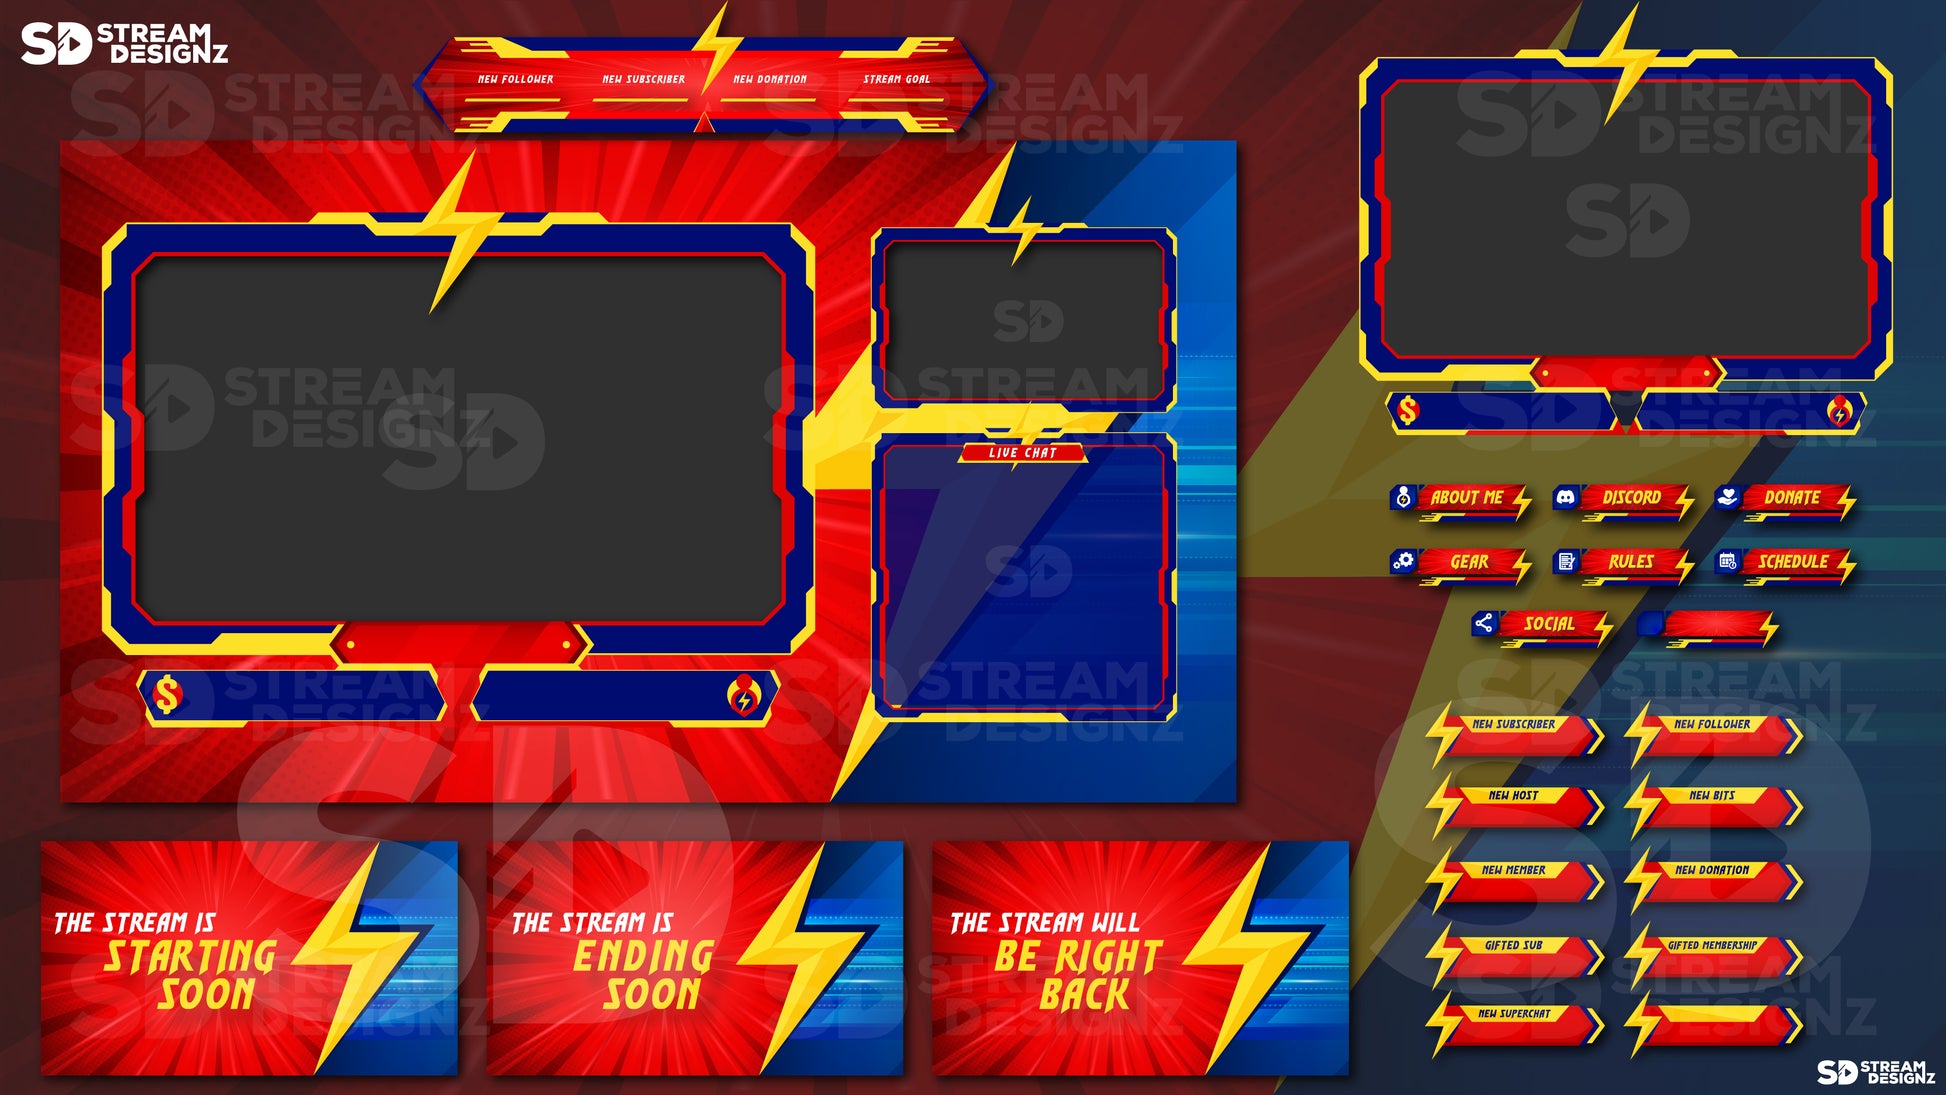 animated stream overlay package flash feature image stream designz